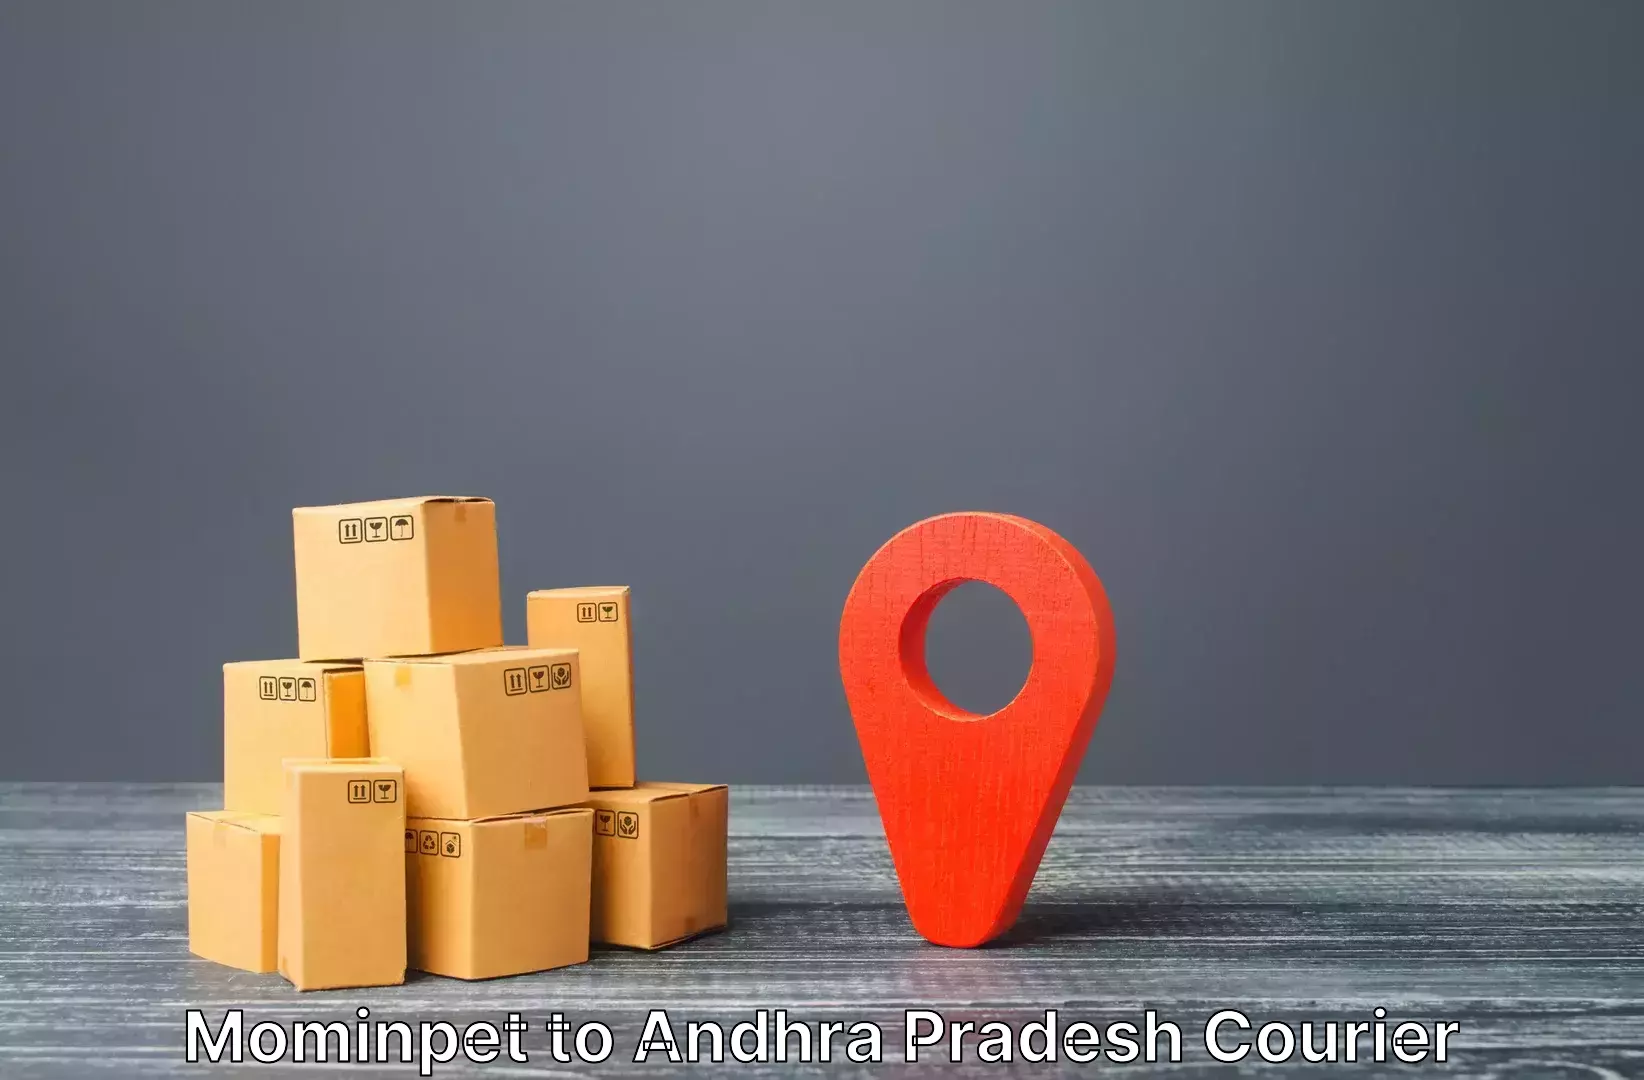 Luggage shipping options Mominpet to Visakhapatnam Port